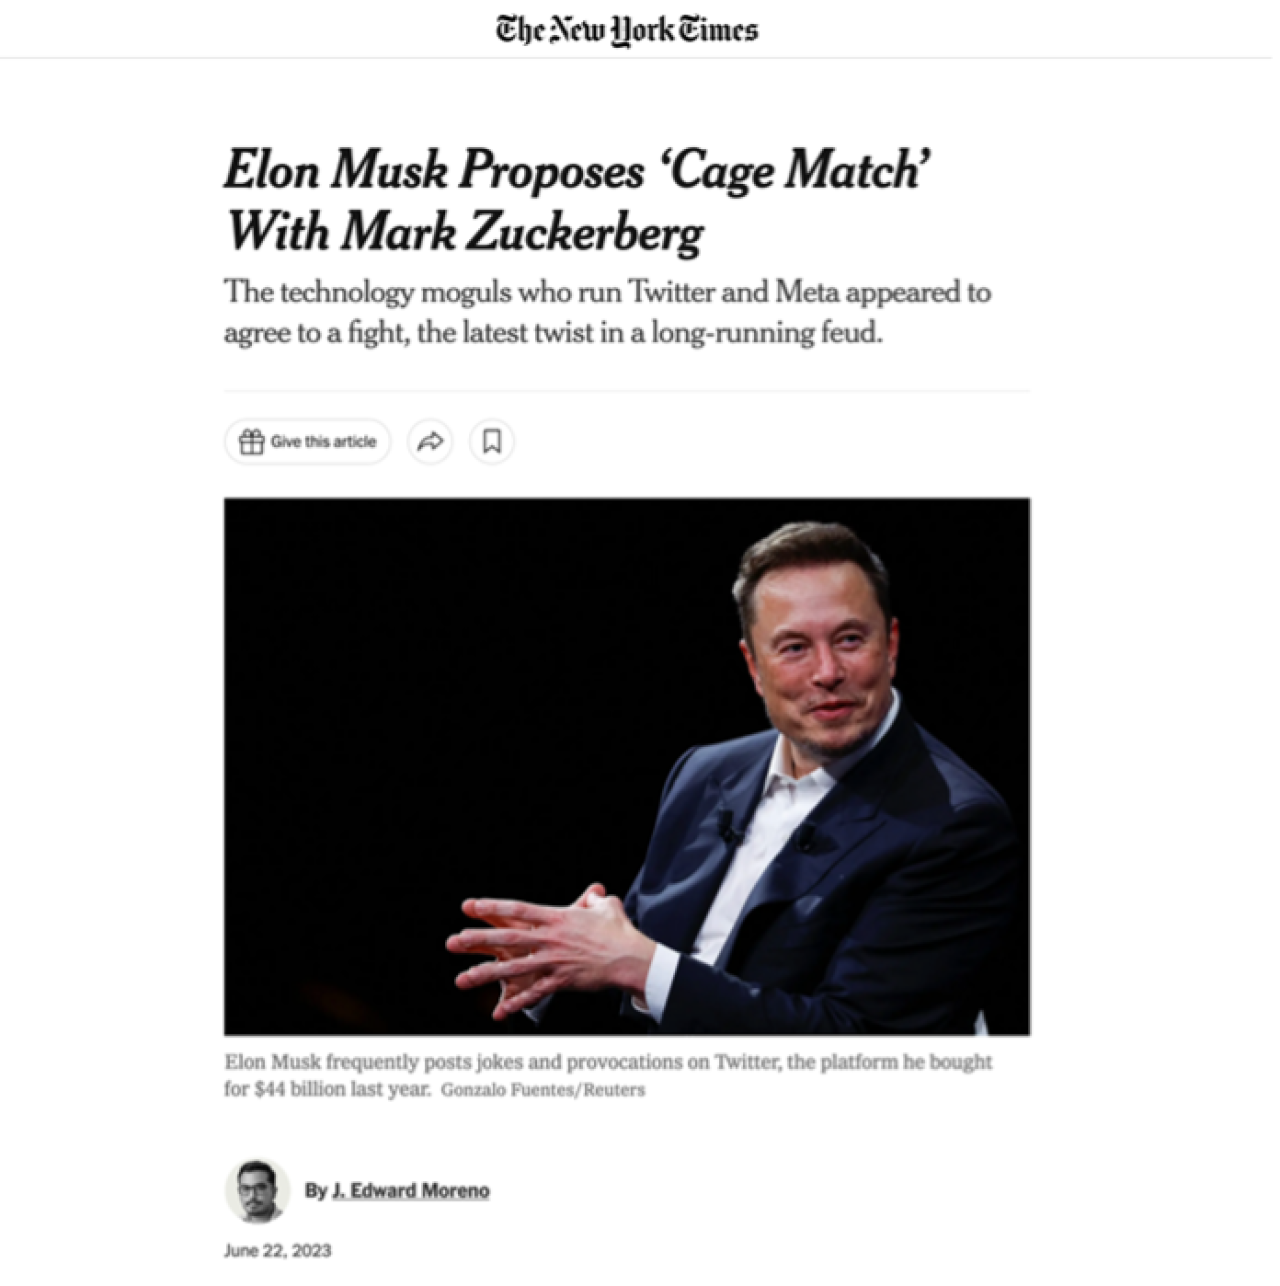 Screenshot of New York Times online article titled "Elon Musk Proposes 'Cage Match' With Mark Zuckerberg.'